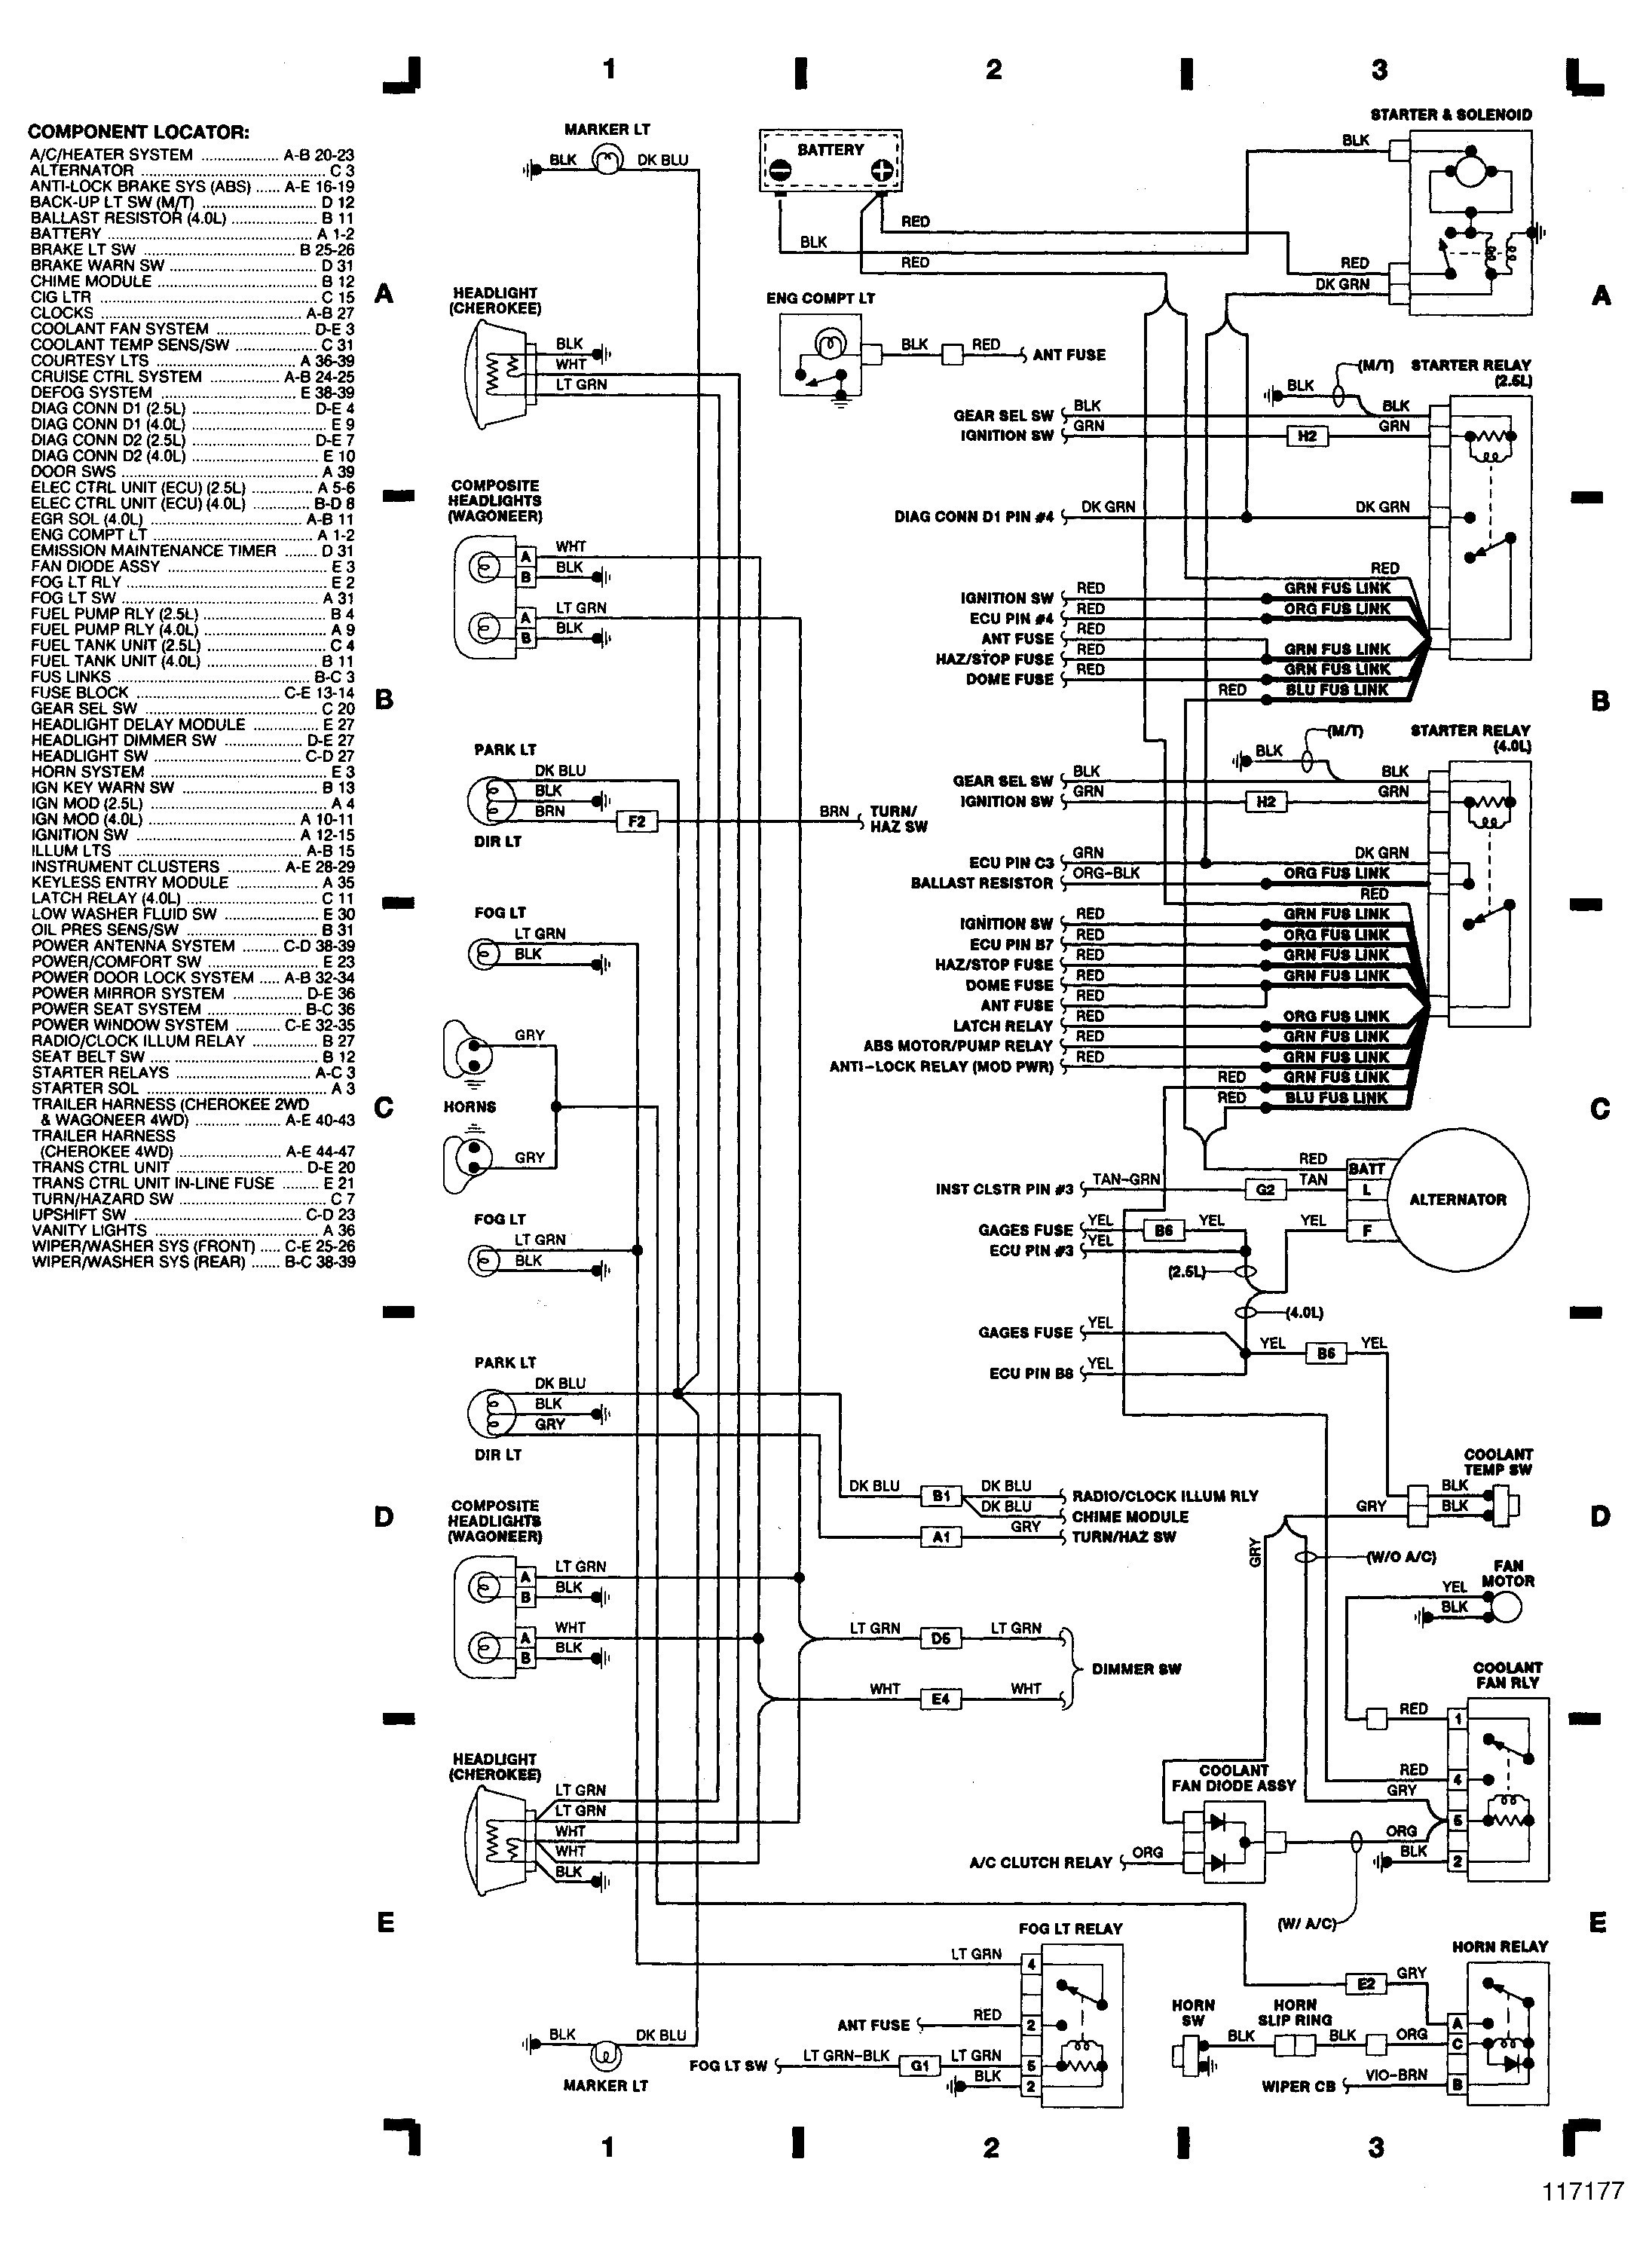 Wiring Diagram For A 1998 Jeep Cherokee New Cherokee Wiring Diagram Wiring Diagrams